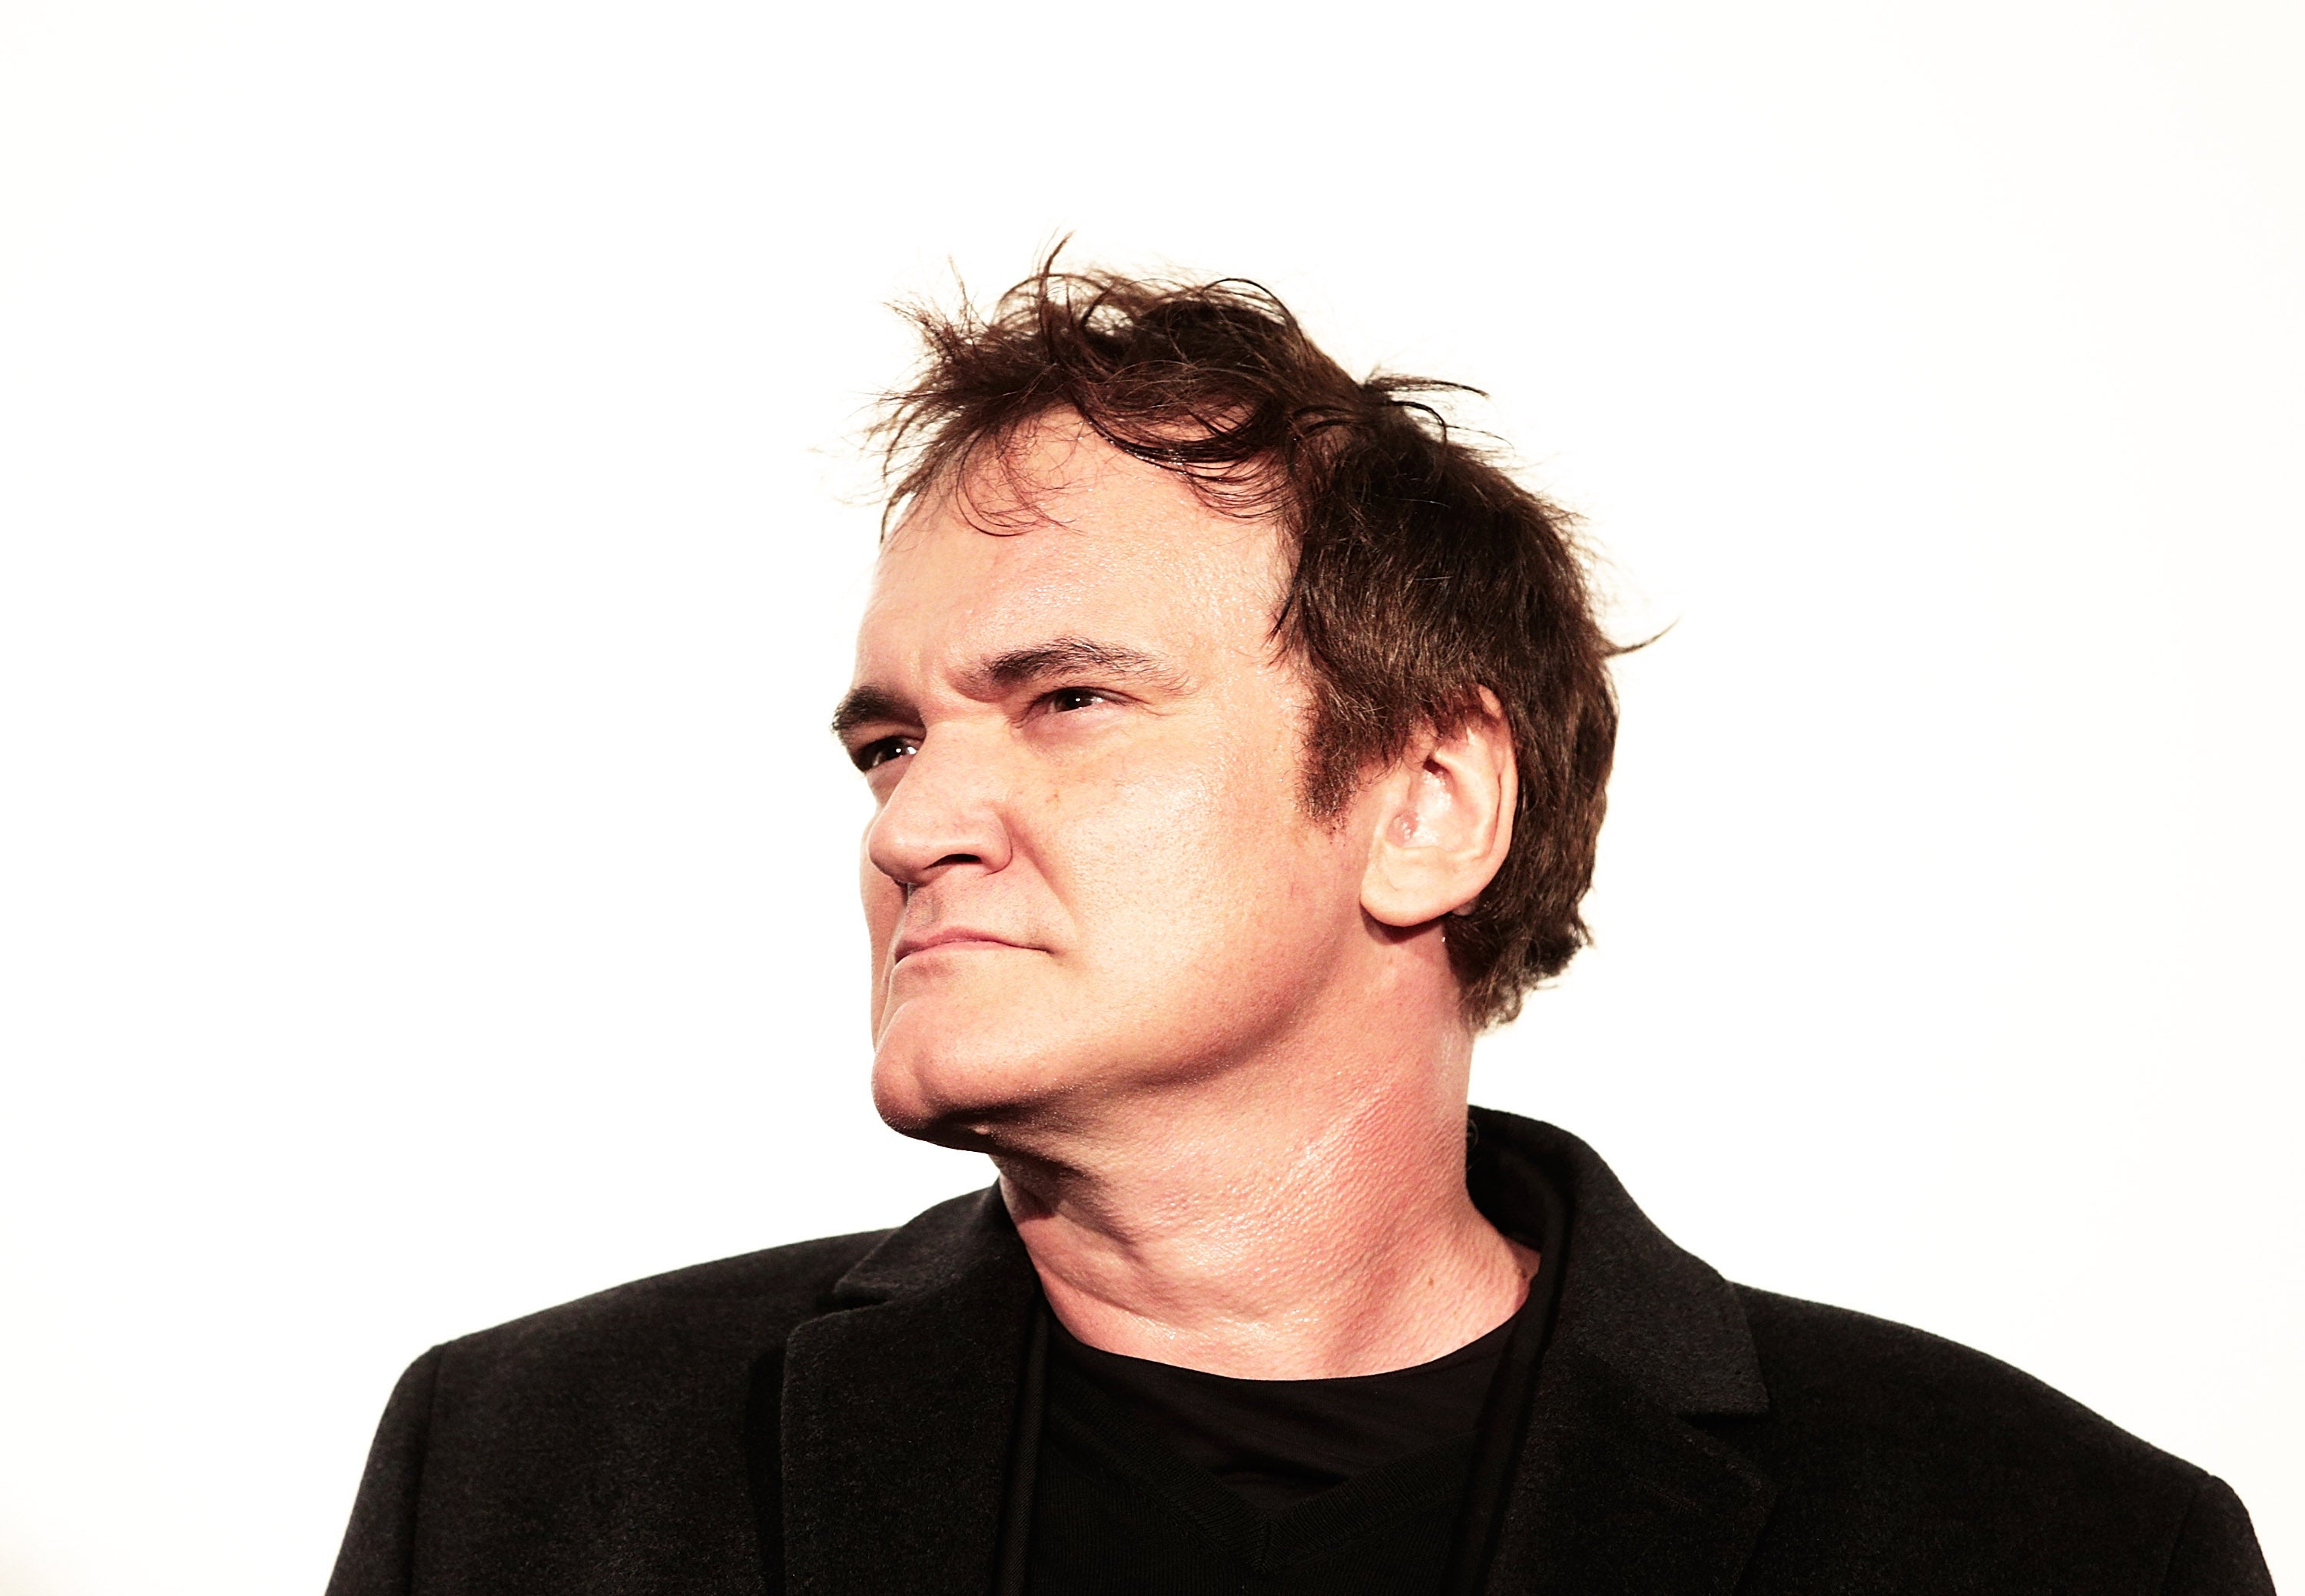 Pulp And Circumstance Tarantino Rewrites History Fresh Air Archive Interviews with Terry Gross